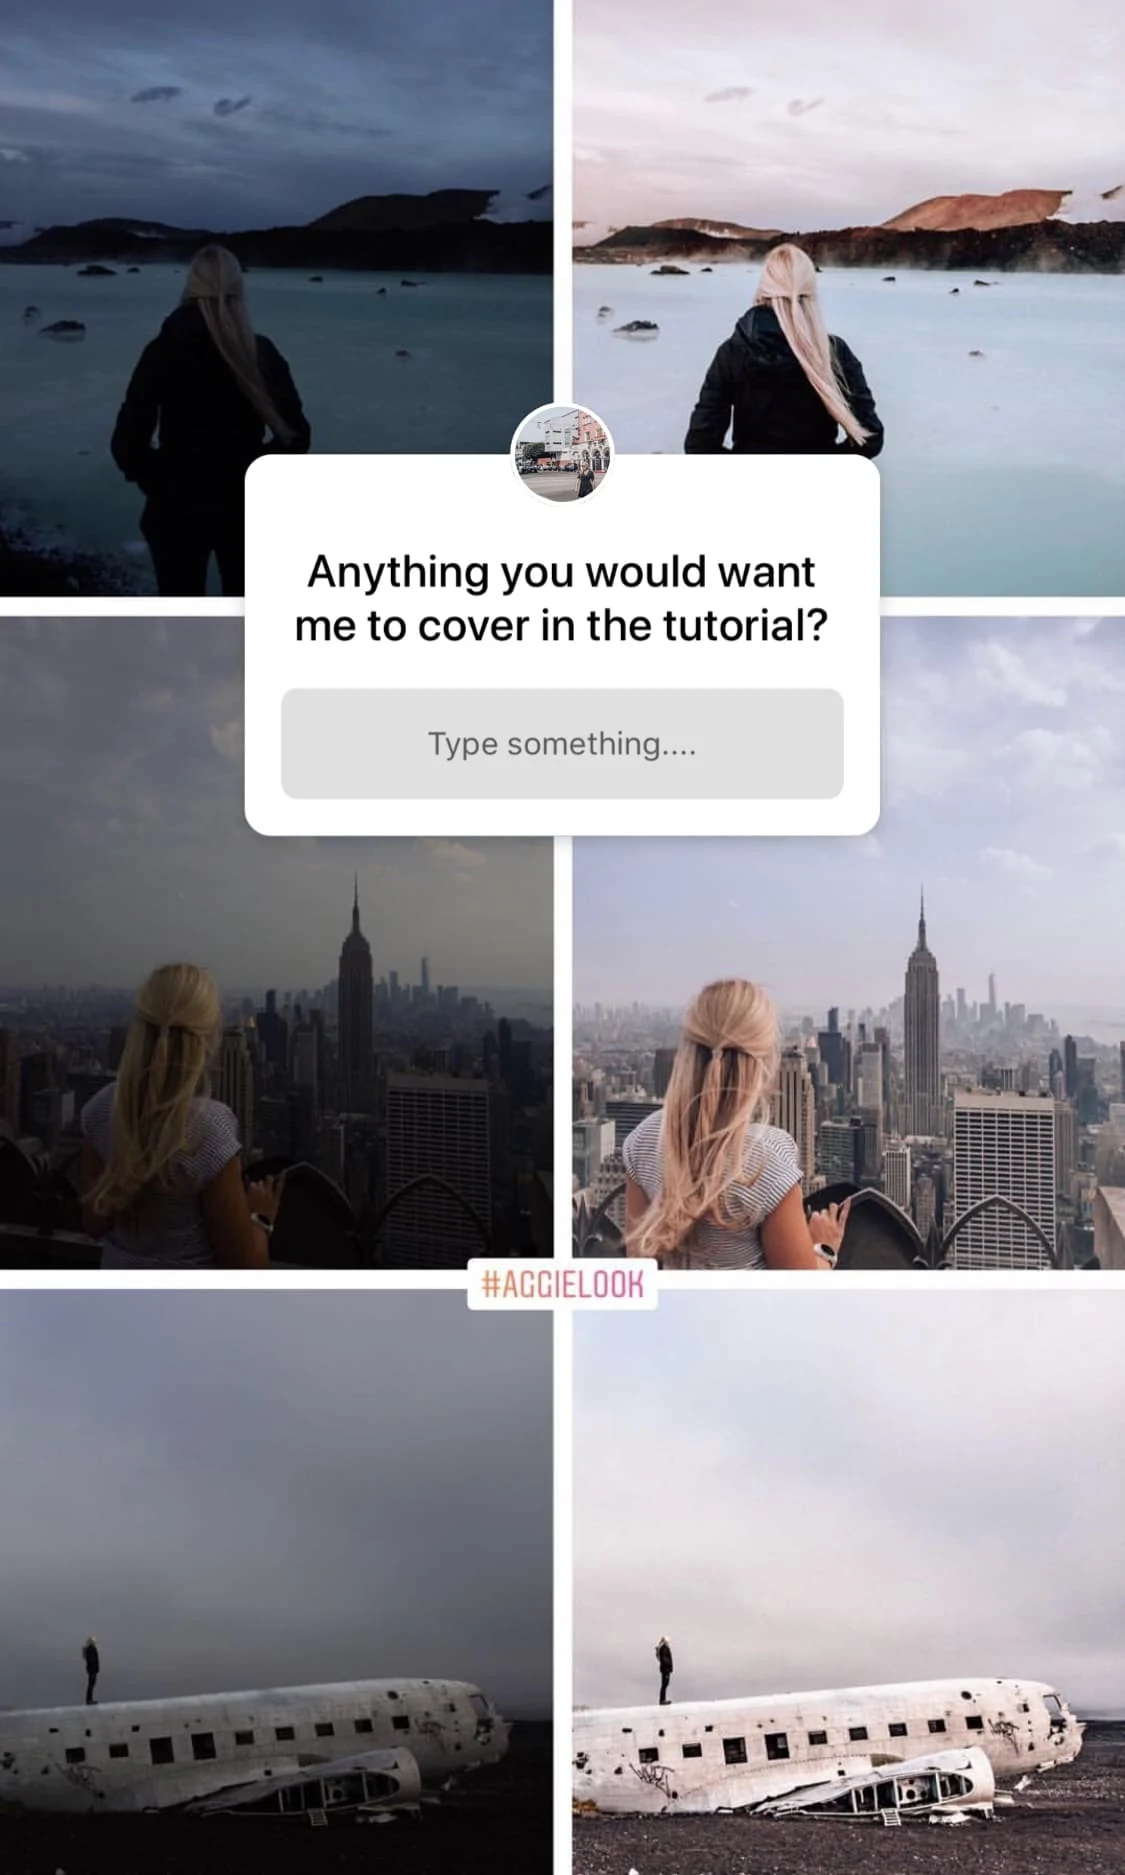 Ideas for stories to post in Instagram. See more tips to grow your Instagram on the full blog post!